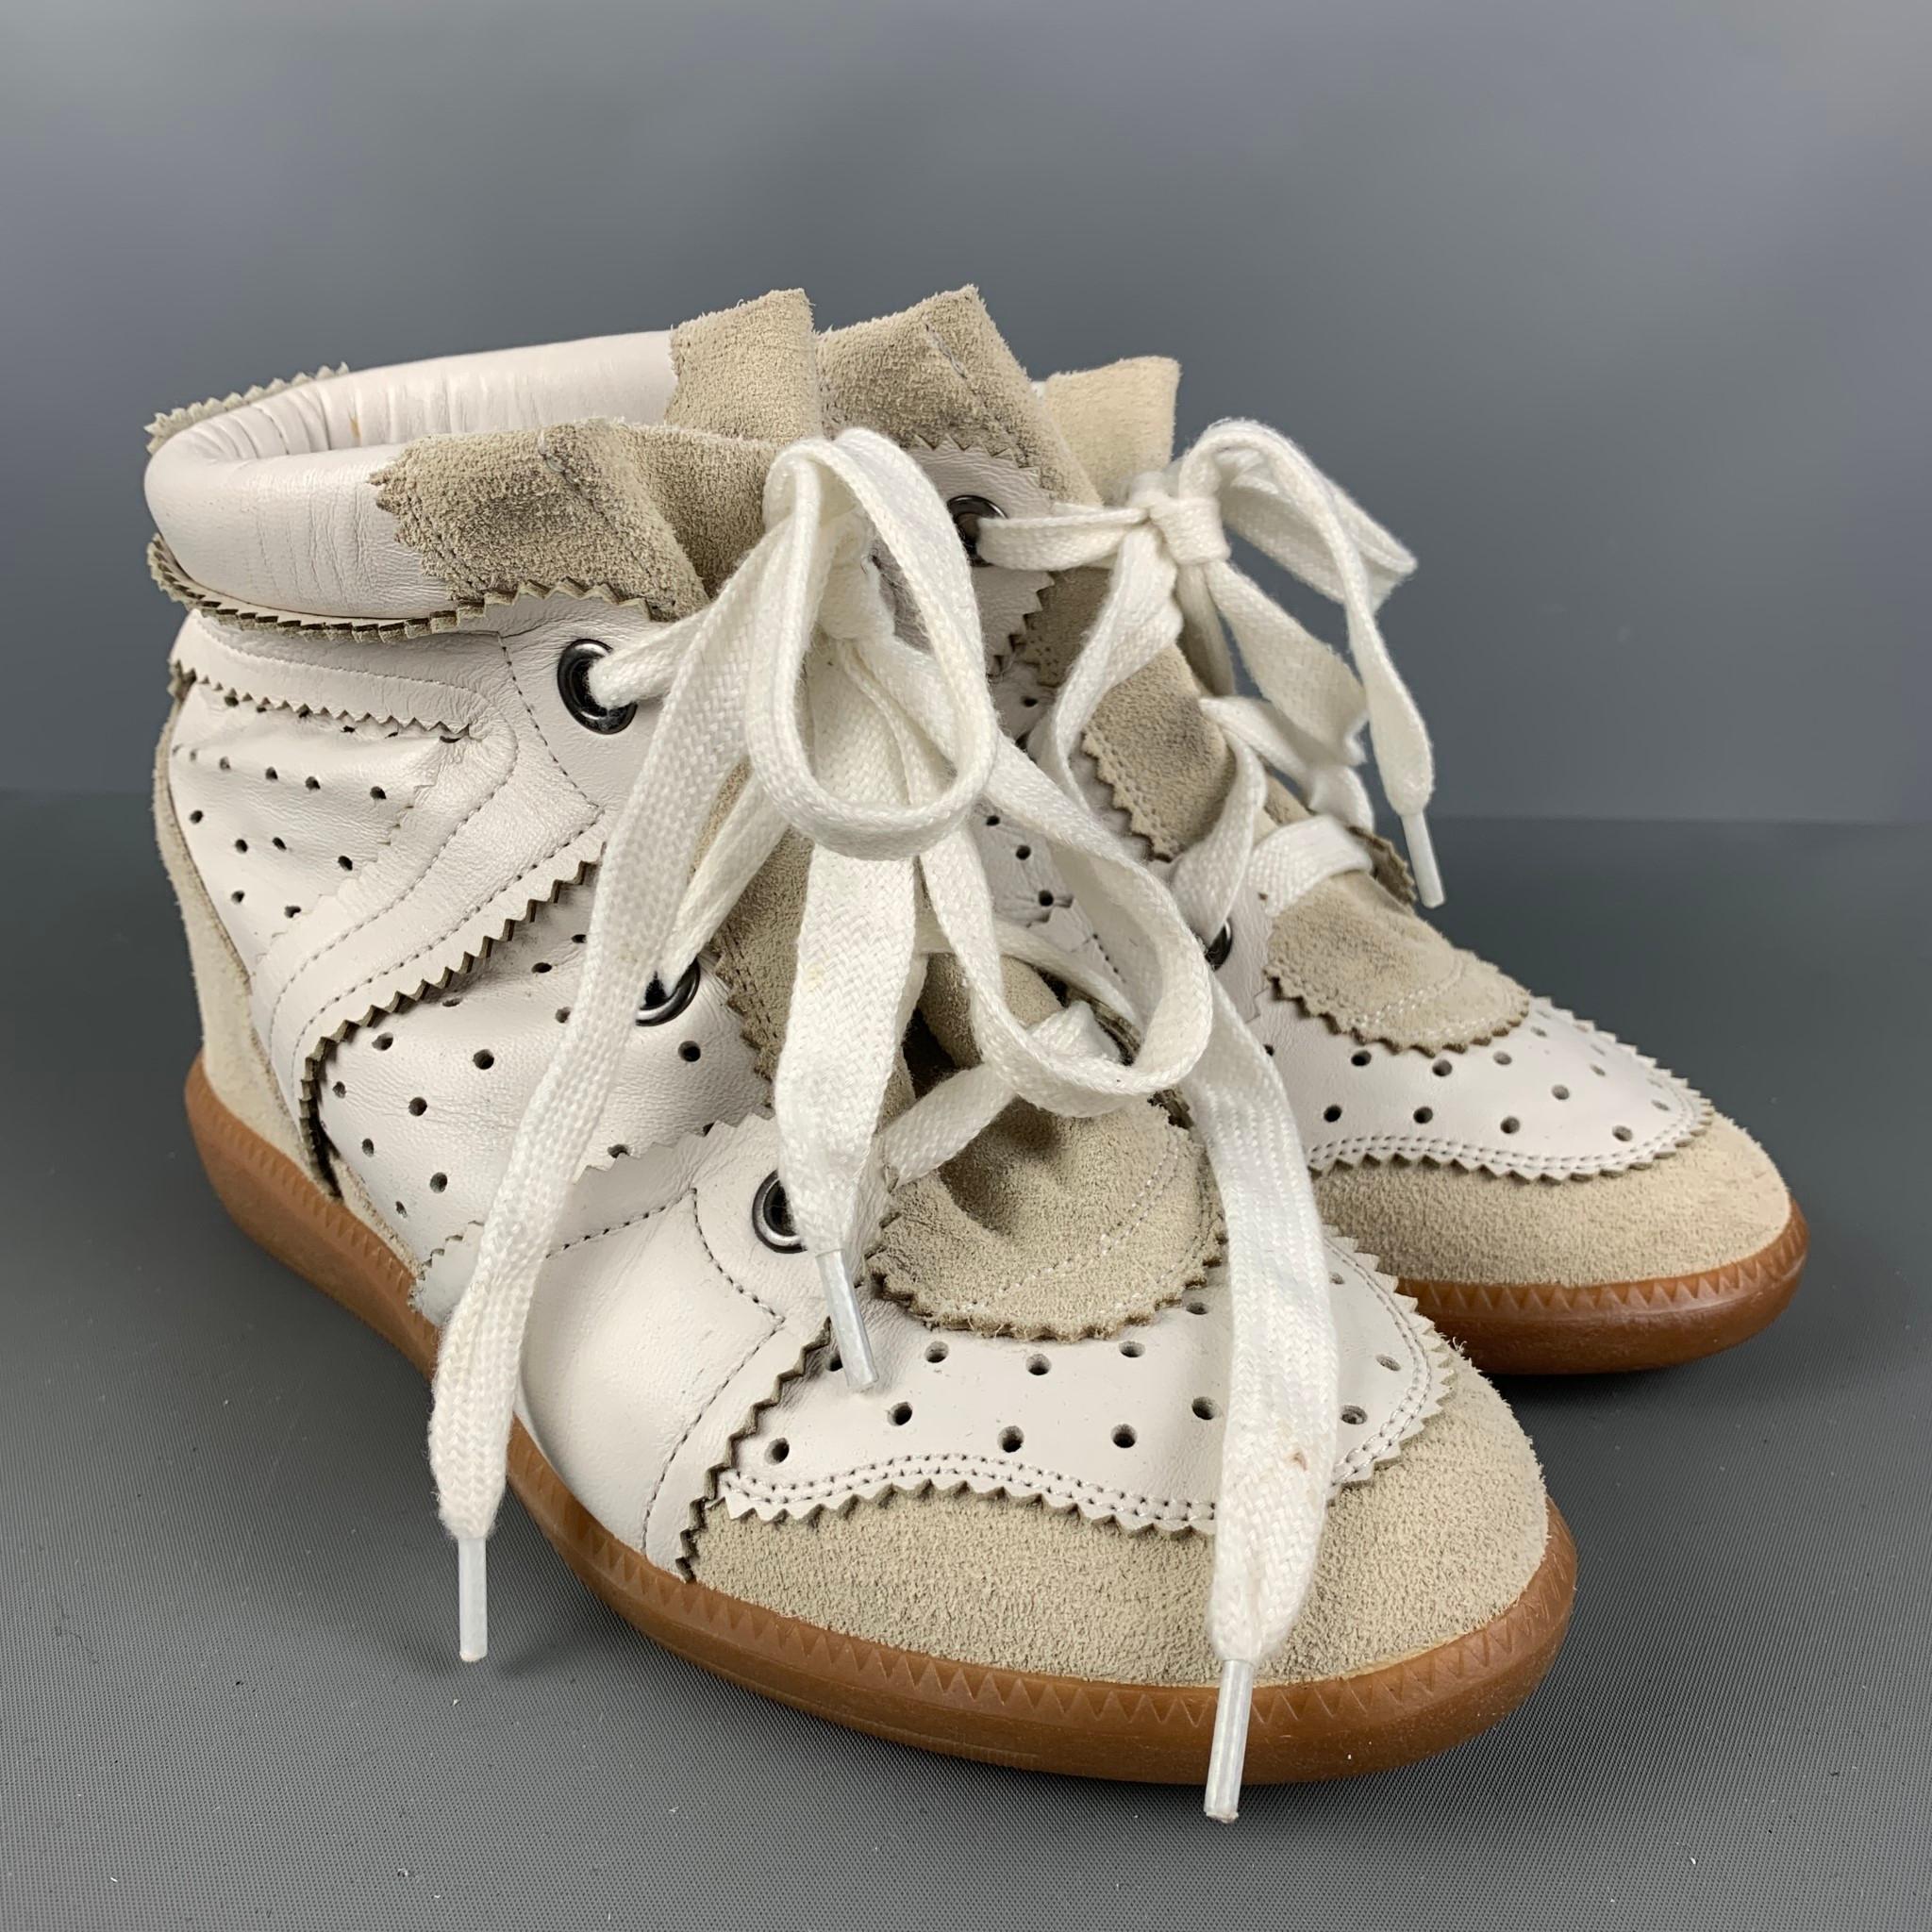 ISABEL MARANT sneakers comes in a white & beige perforated leather featuring a wedge style,rubber sole, and a lace up closure.

Very Good Pre-Owned Condition.
Marked: 37

Outsole: 9.5 in. x 3.5 in.  

SKU: 124362
Category: Sneakers

More